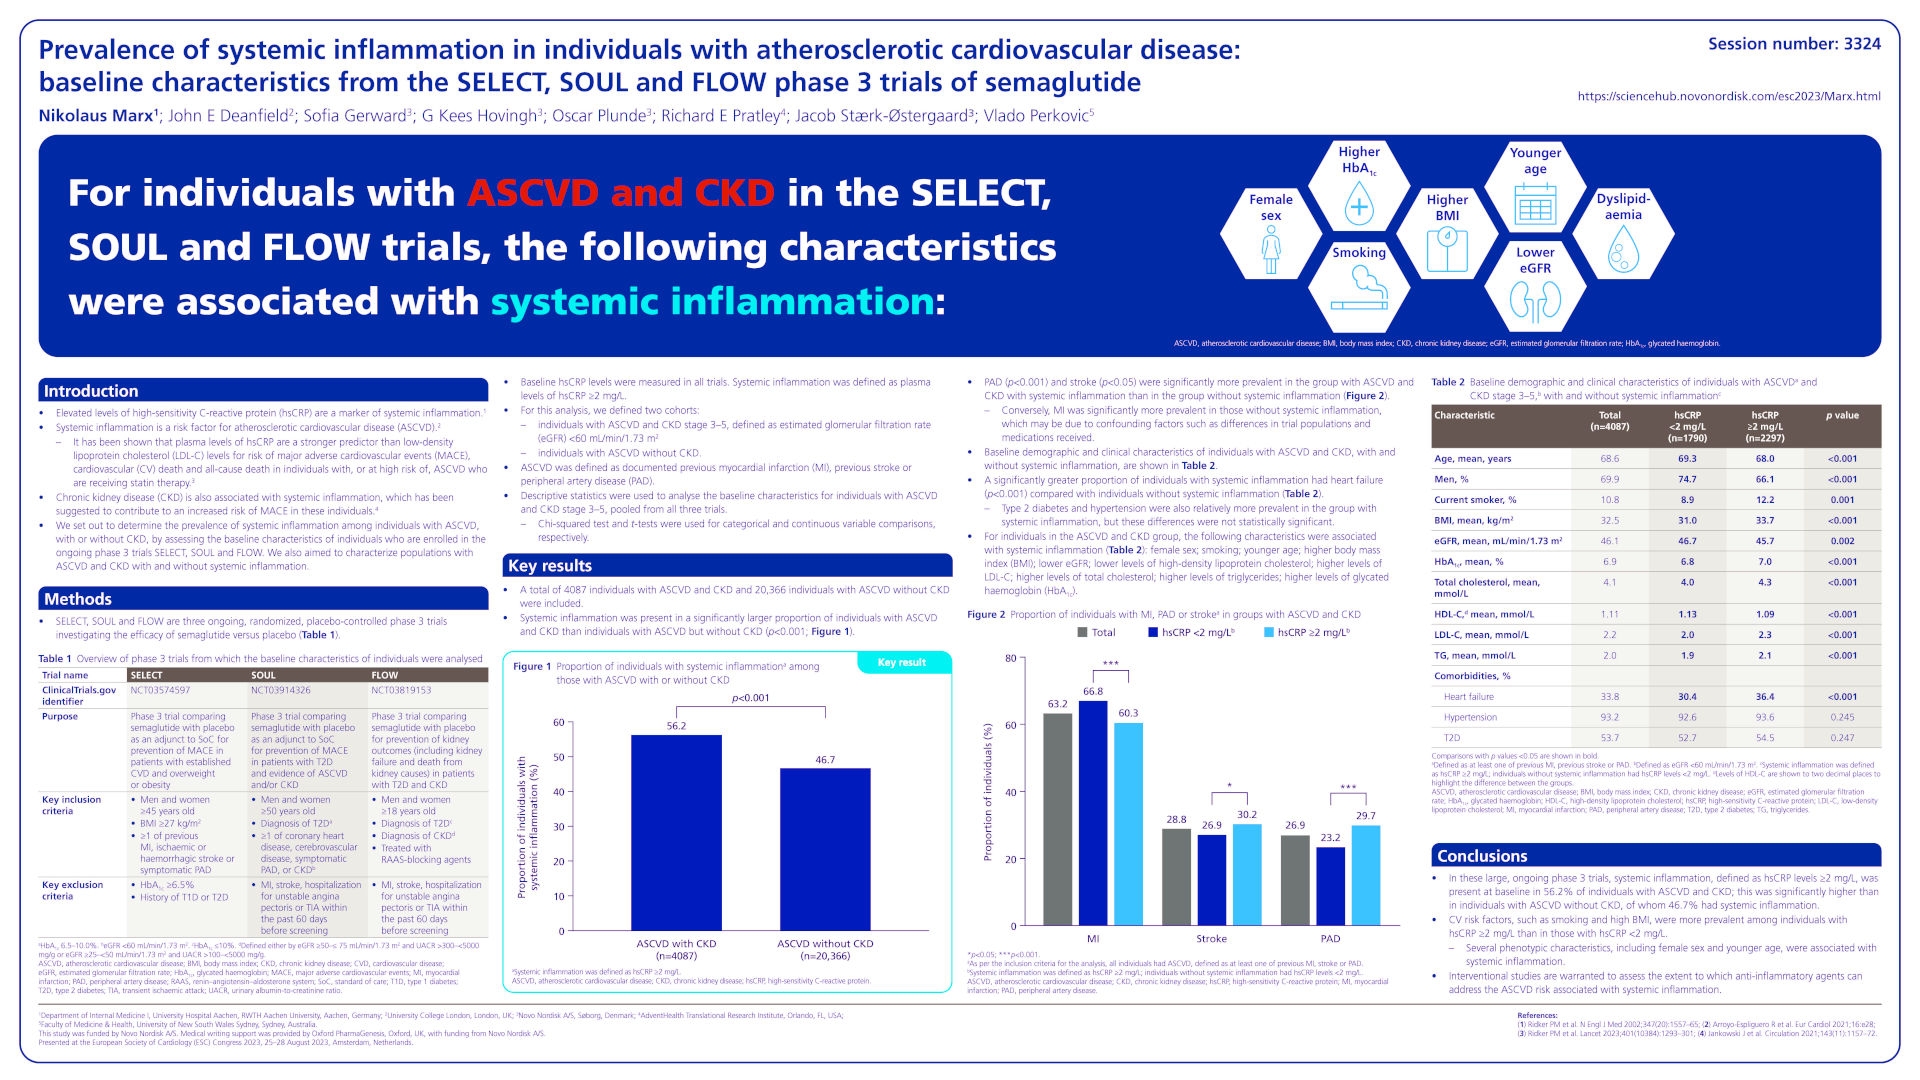 Prevalence of systemic inflammation in individuals with atherosclerotic cardiovascular disease: baseline characteristics from the SELECT, SOUL and FLOW phase 3 trials of semaglutide - poster